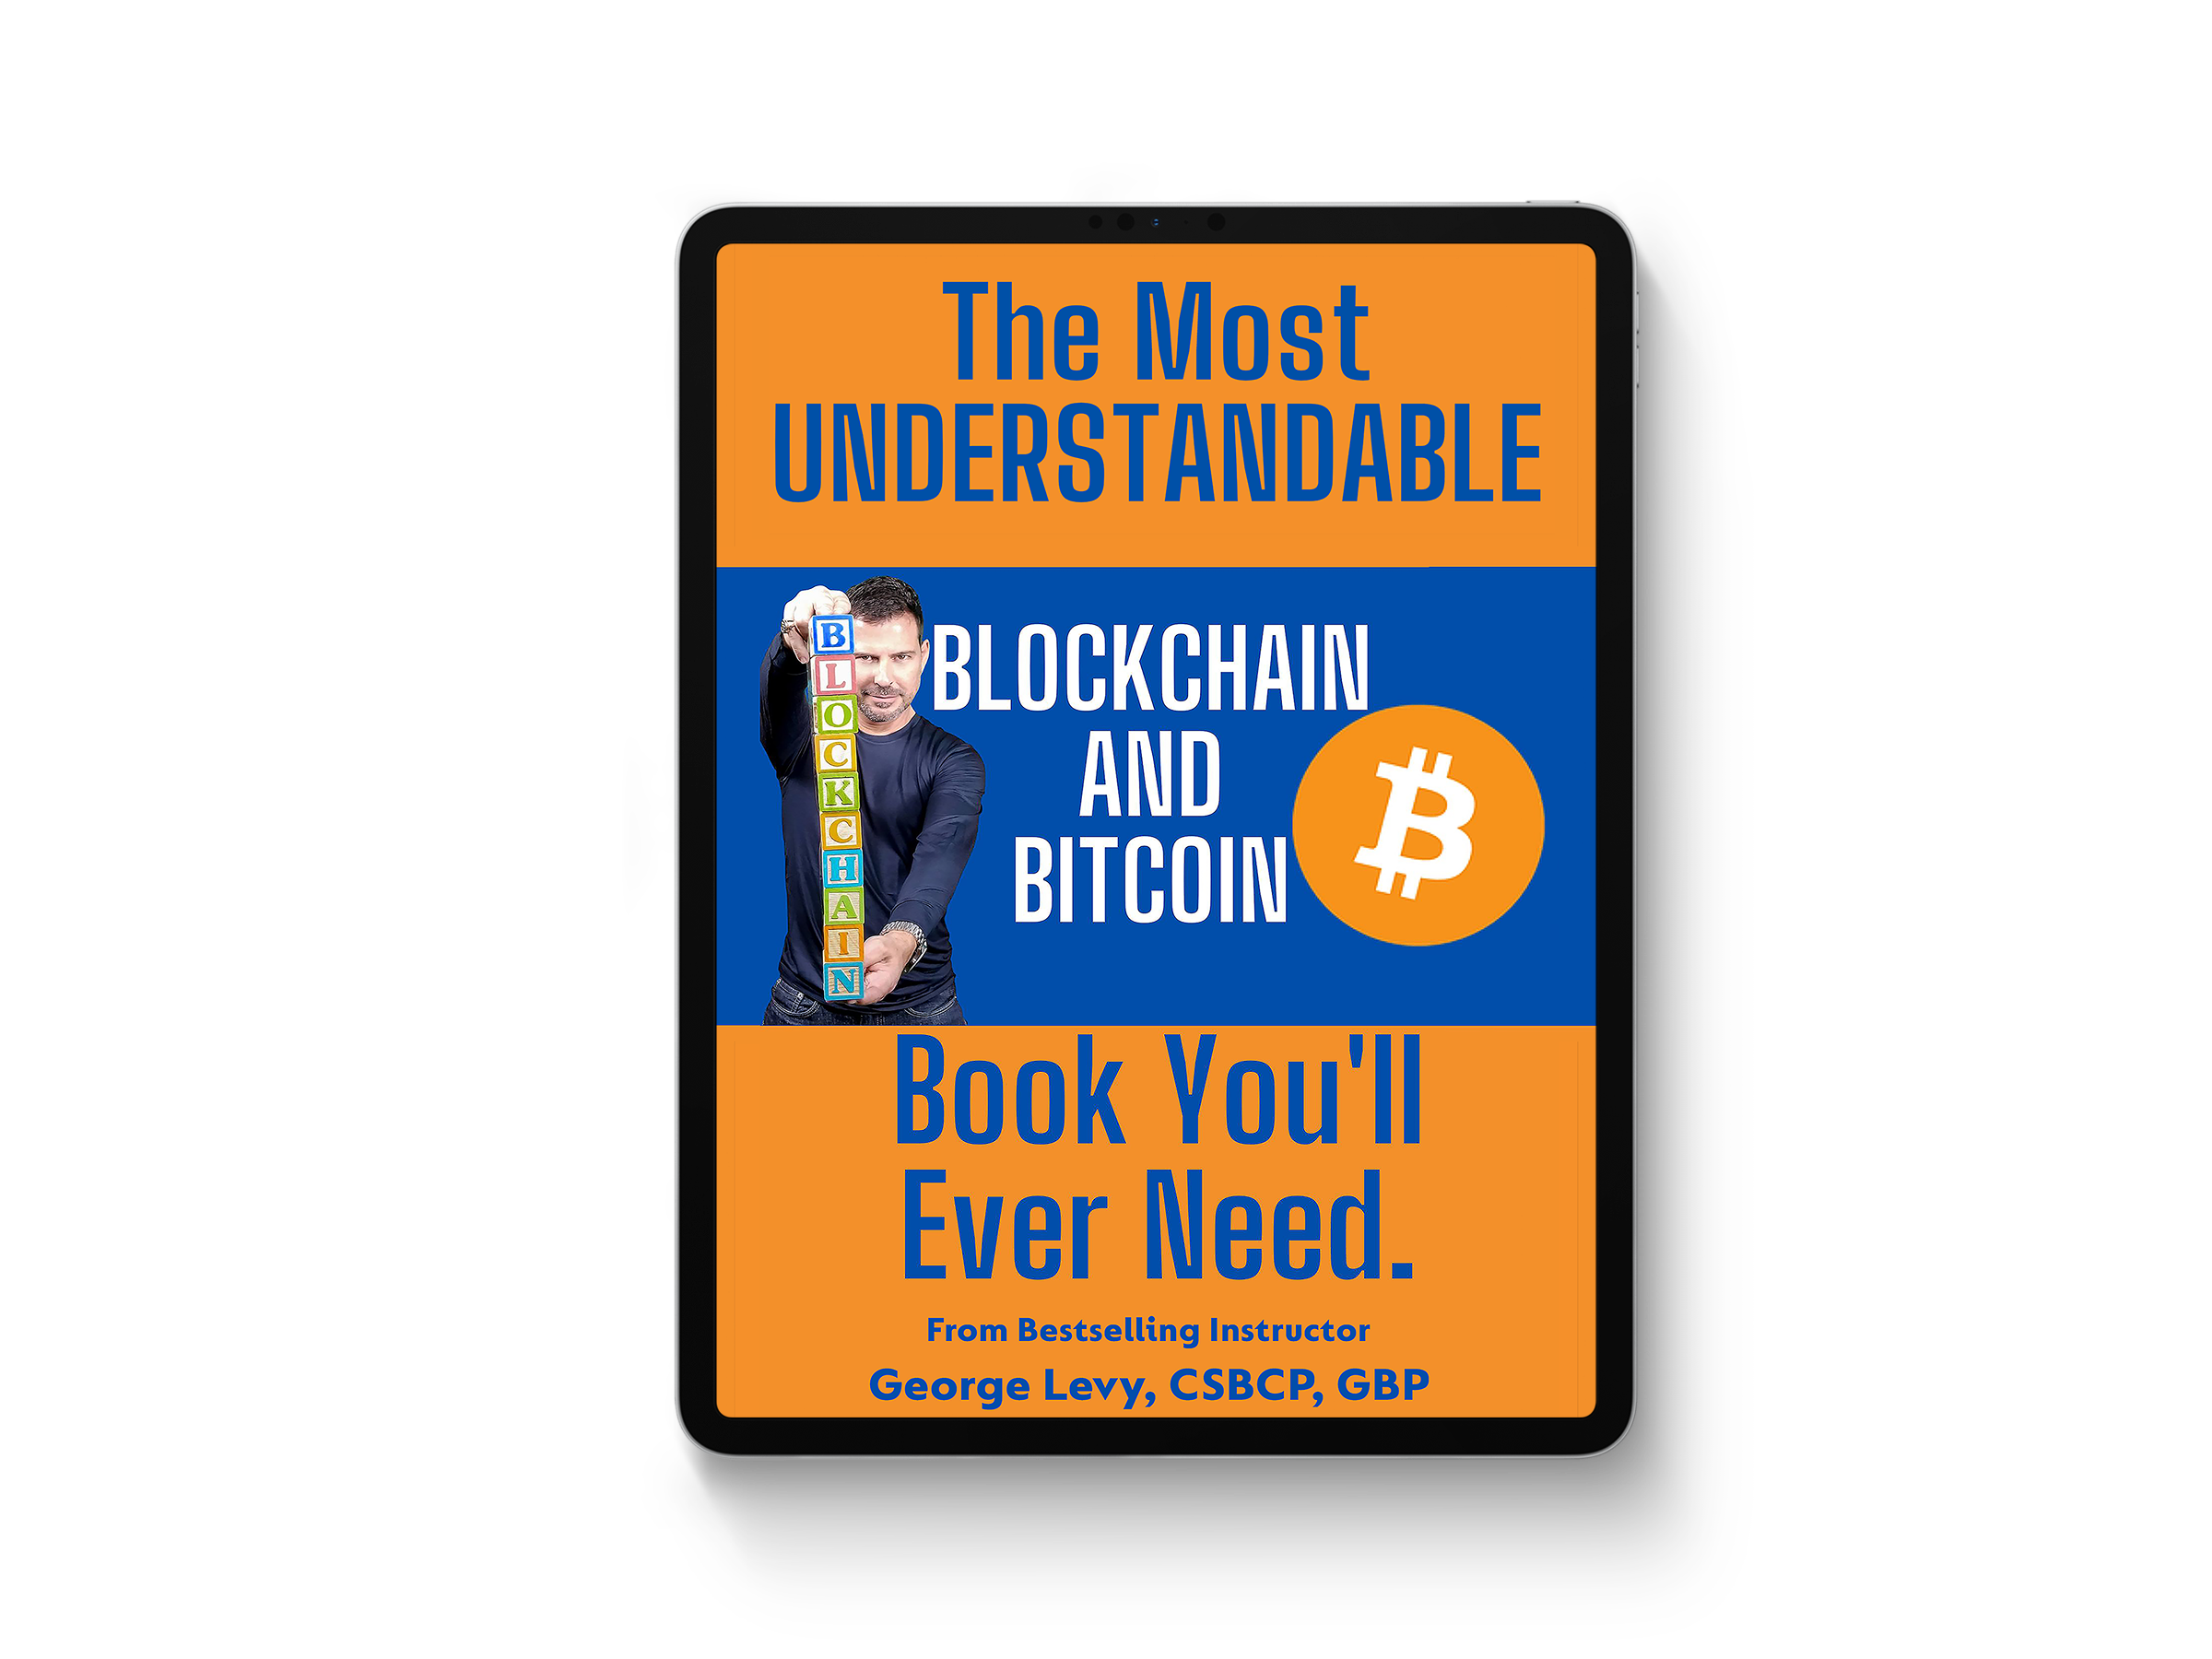 iPad with The Most UNDERSTANDABLE Blockchain and Bitcoin Book You'll Ever Need.